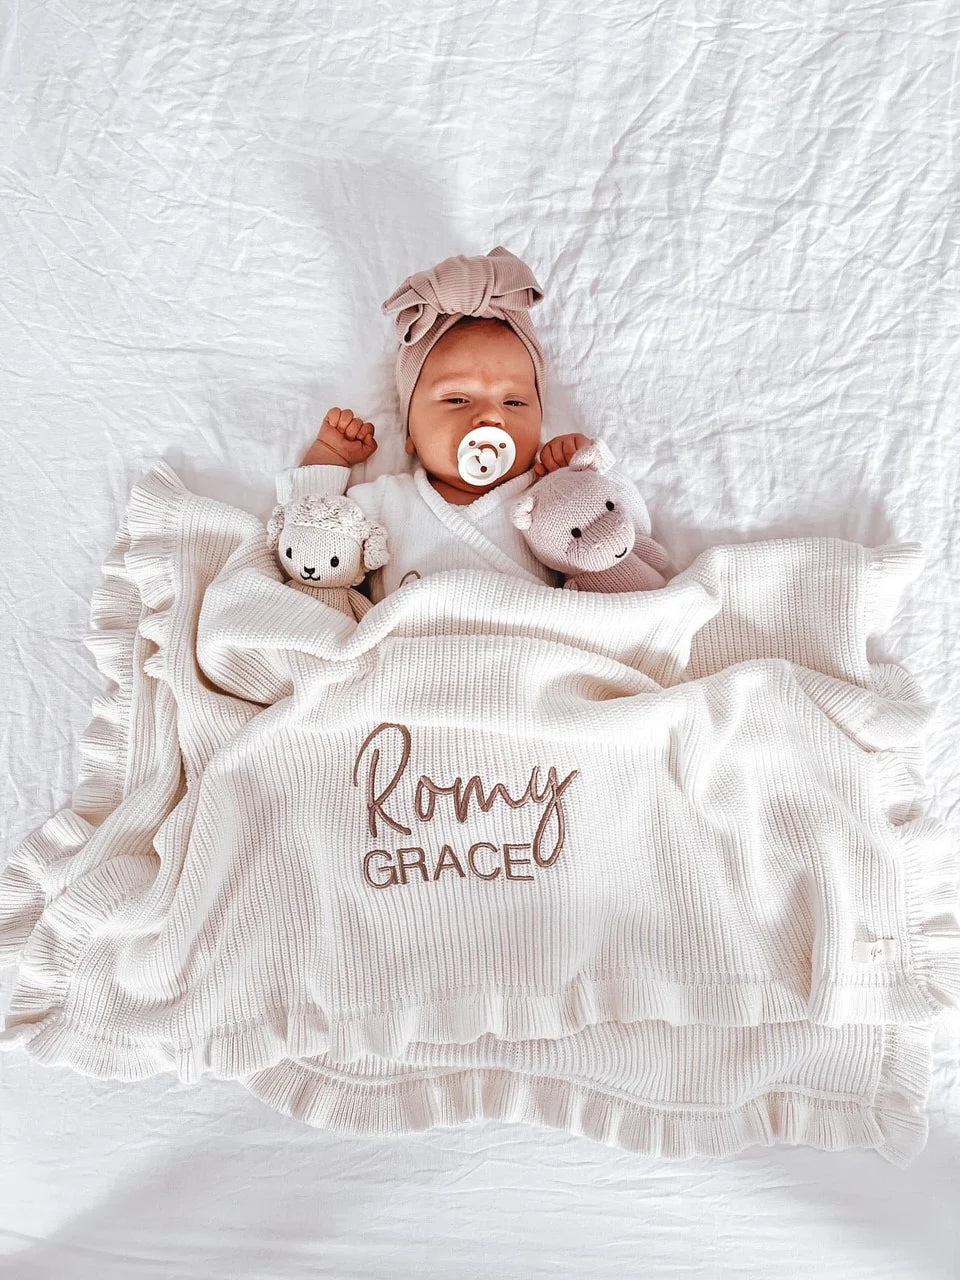 Personalised Baby Blankets: A Timeless Keepsake for New Arrivals